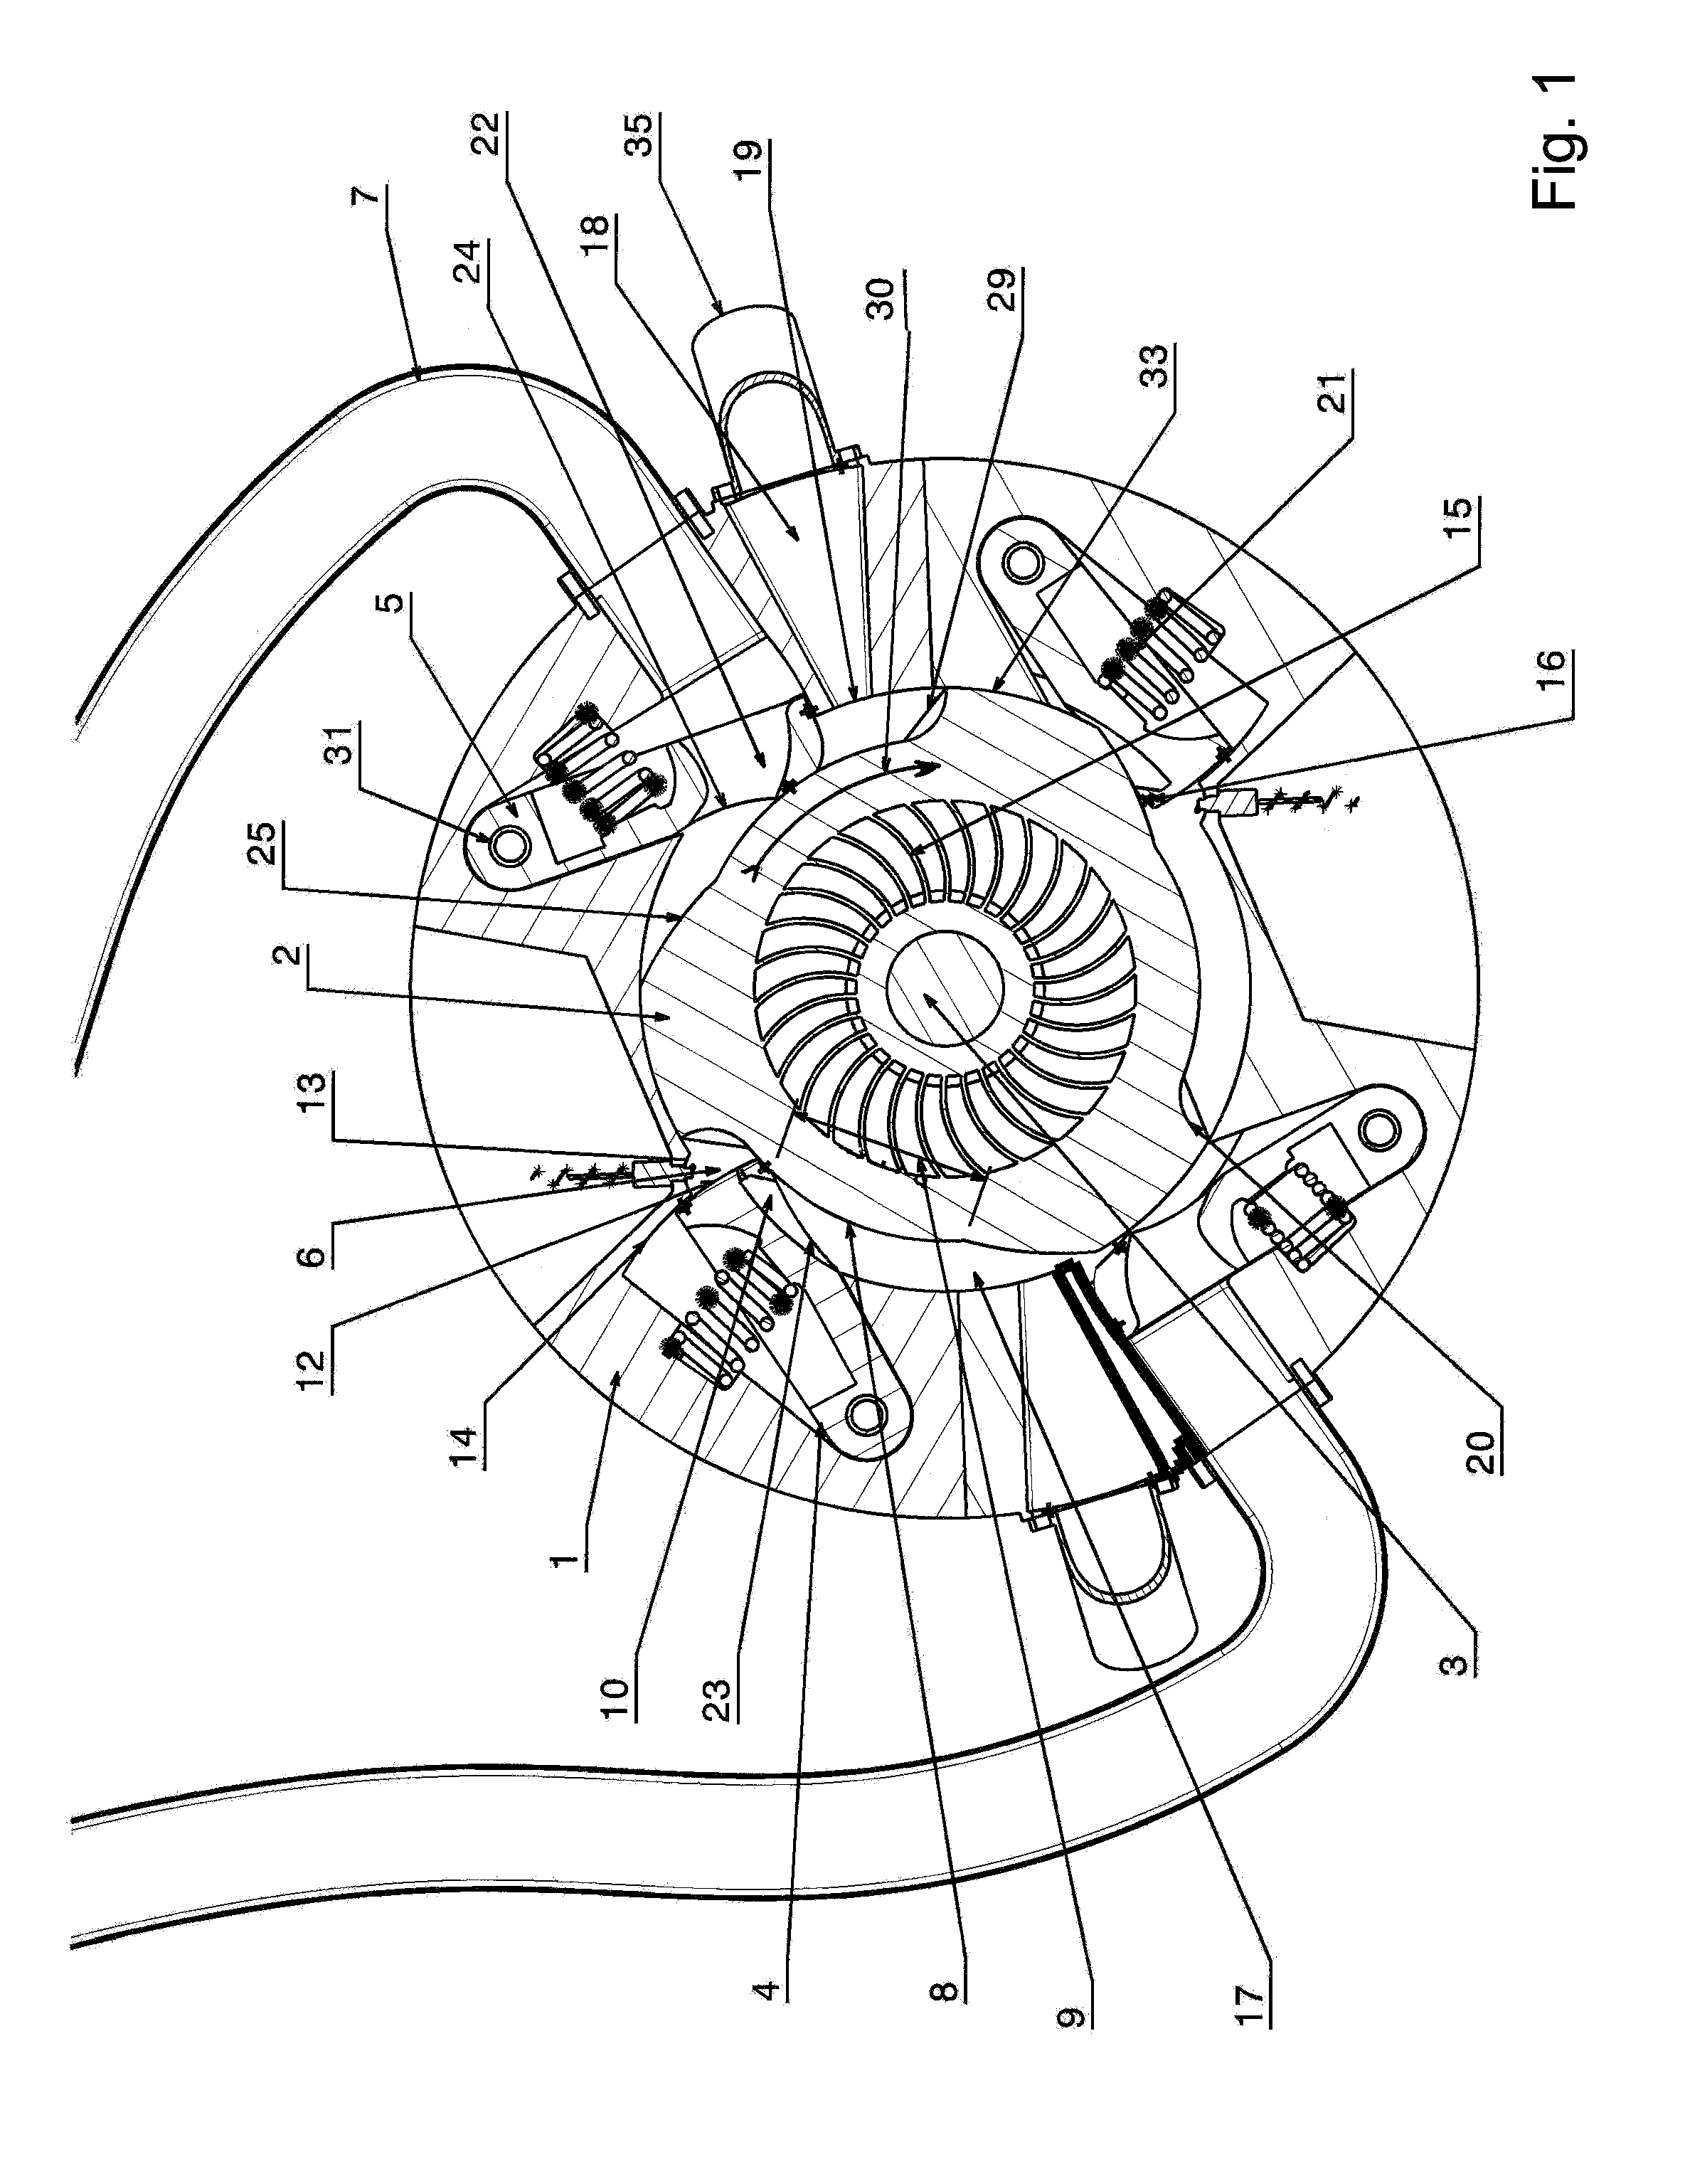 Tangential Combustion Turbine